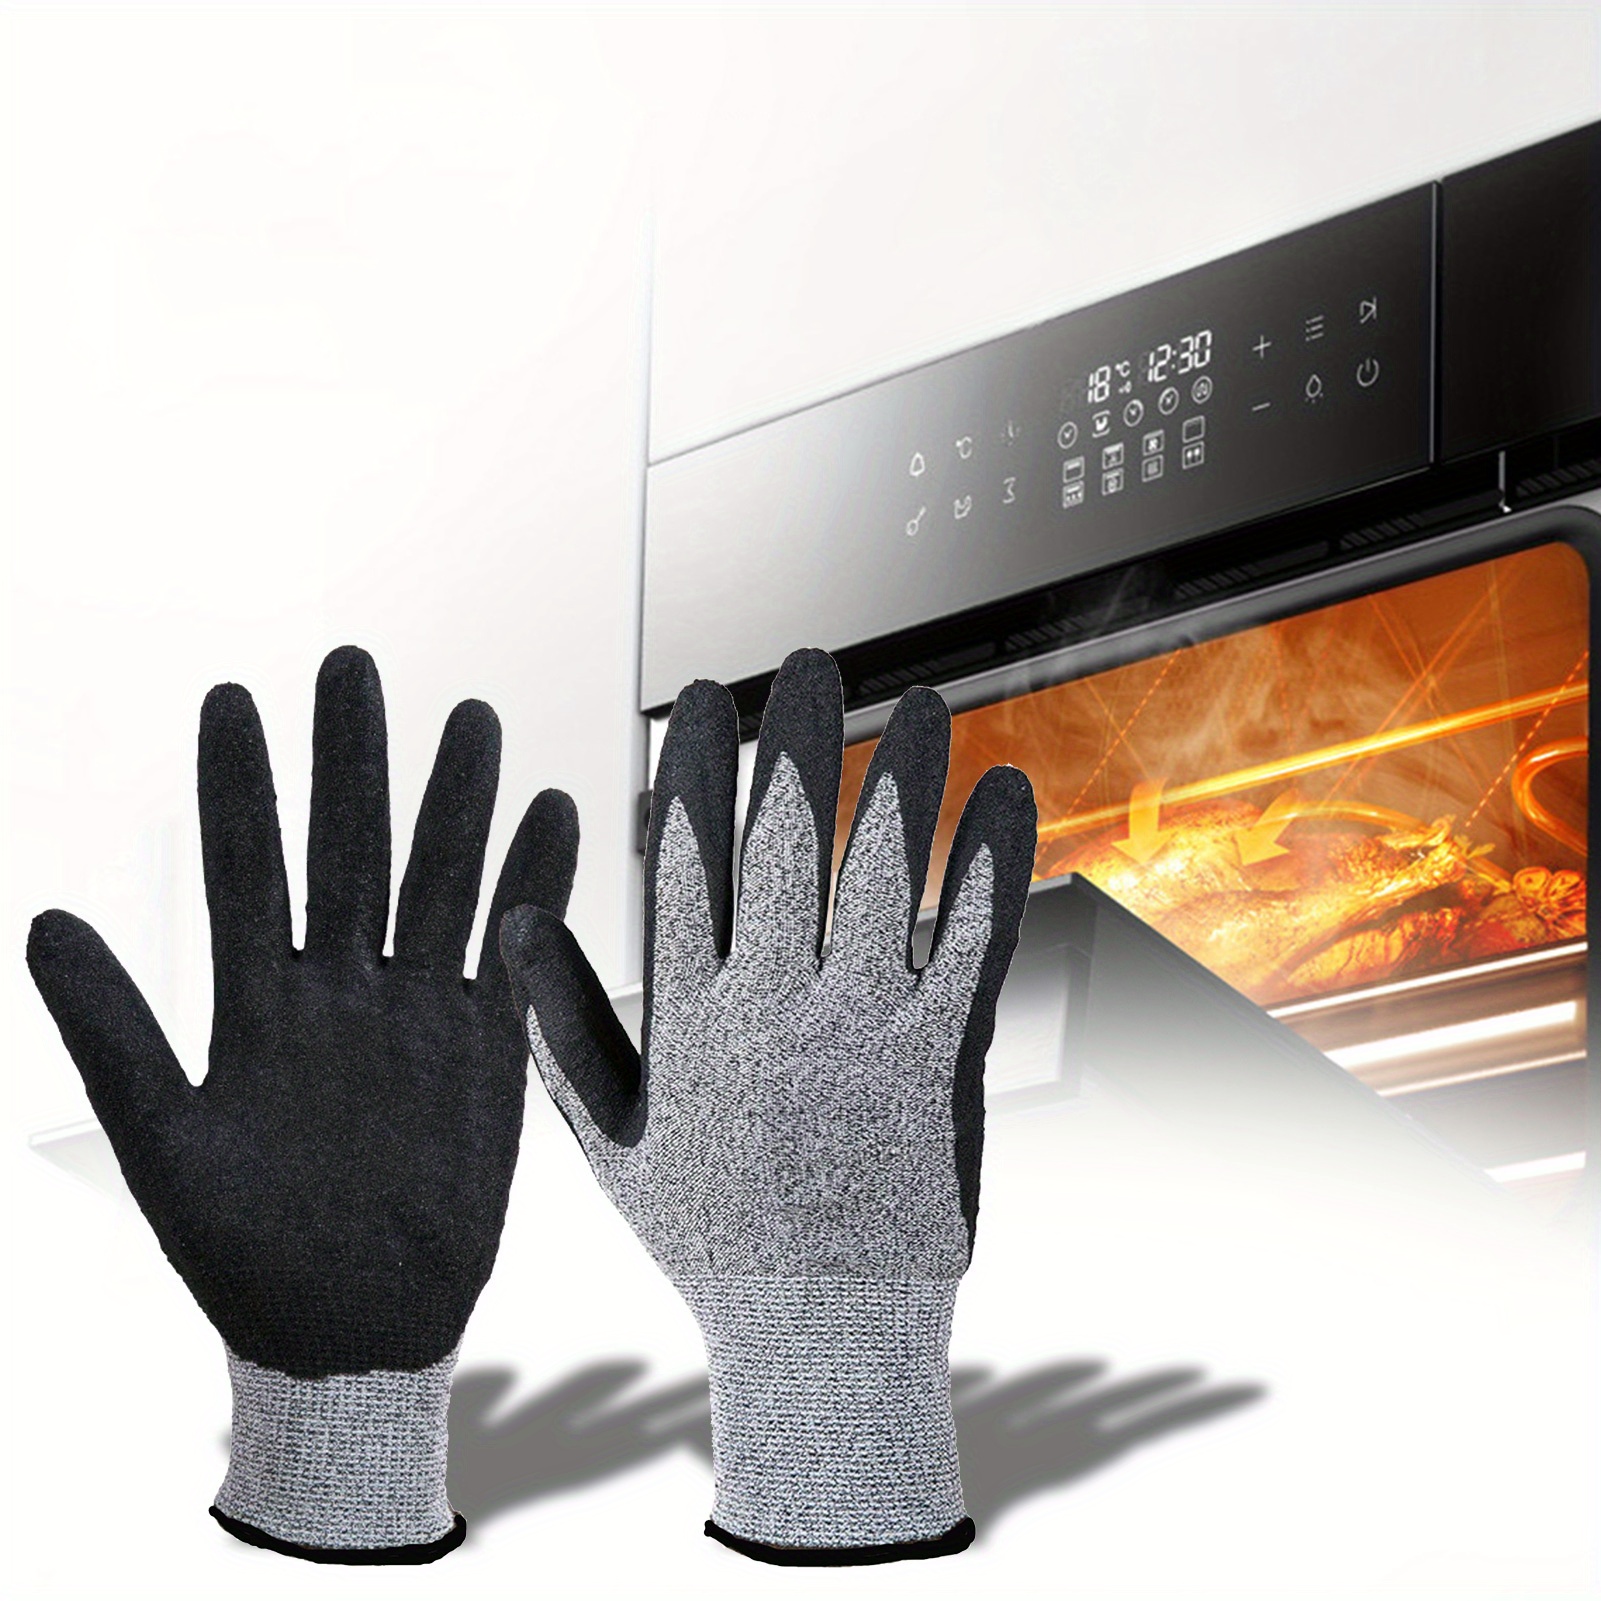 

2 Pcs/pair Of Barbecue Gloves 500/800 Degrees Celsius Heat-resistant Non-slip Microwave Oven Gloves Woodworking Supplies 10.24"x5.91"x1.18